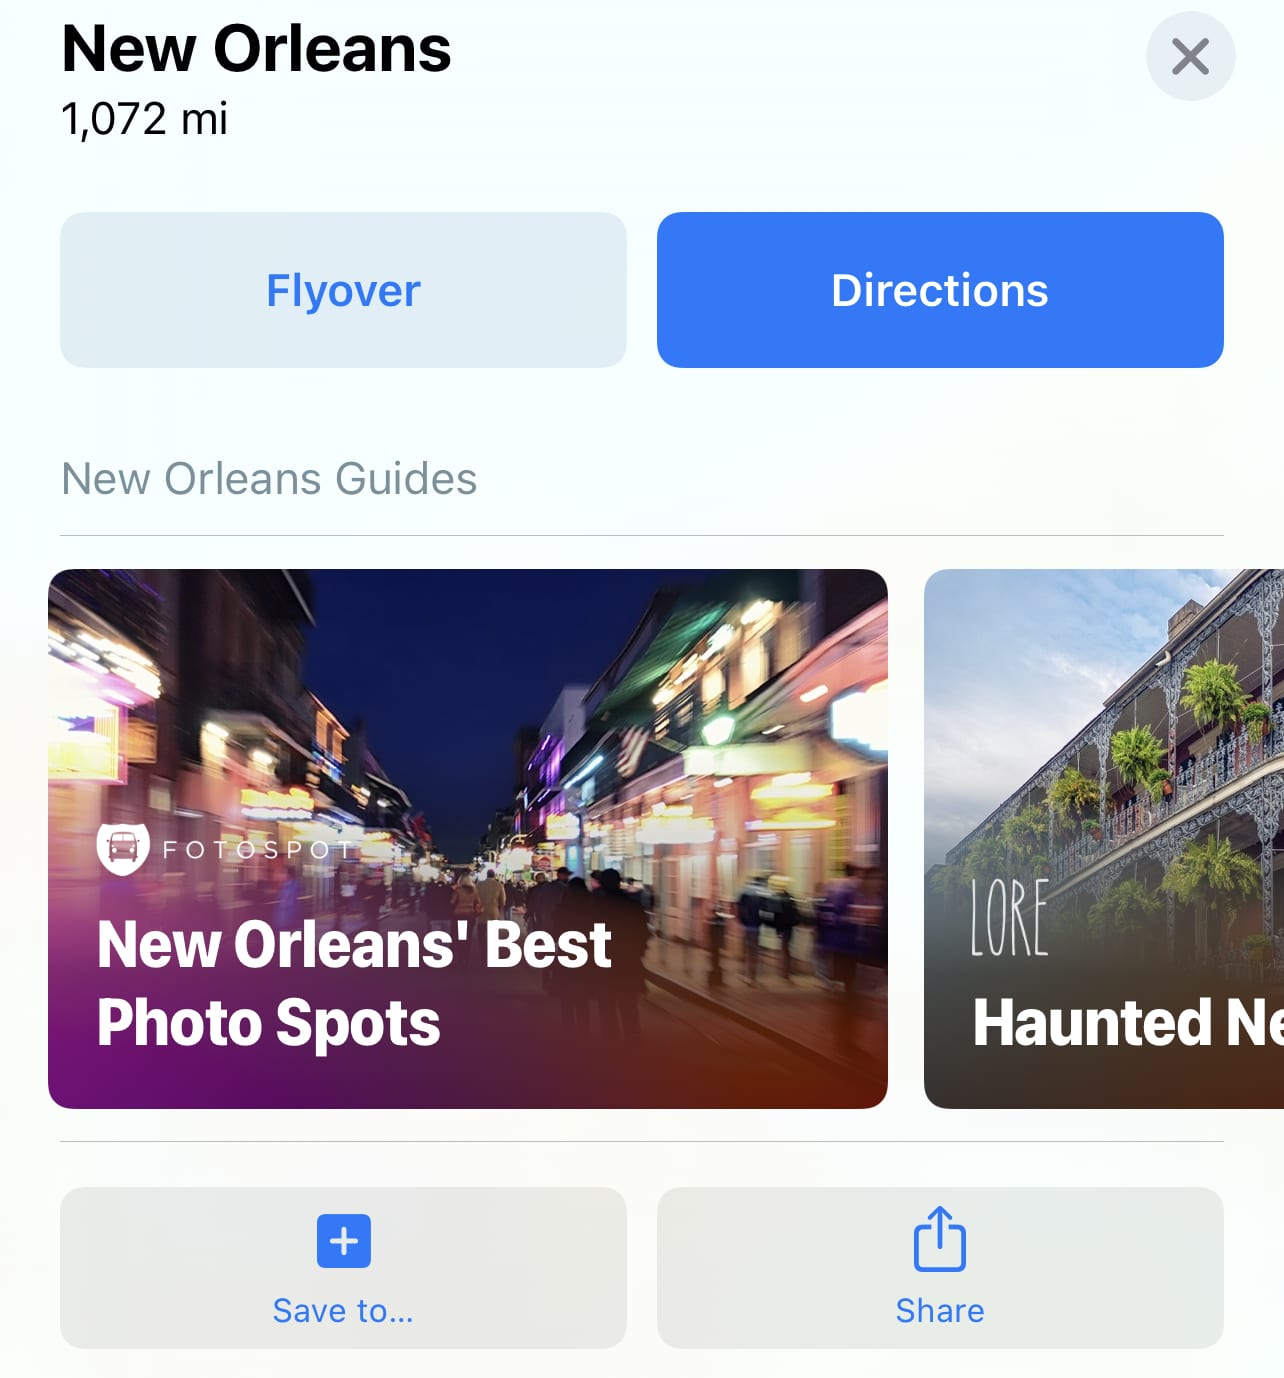 Info on New Orleans, including a side-scrolling list of Guides